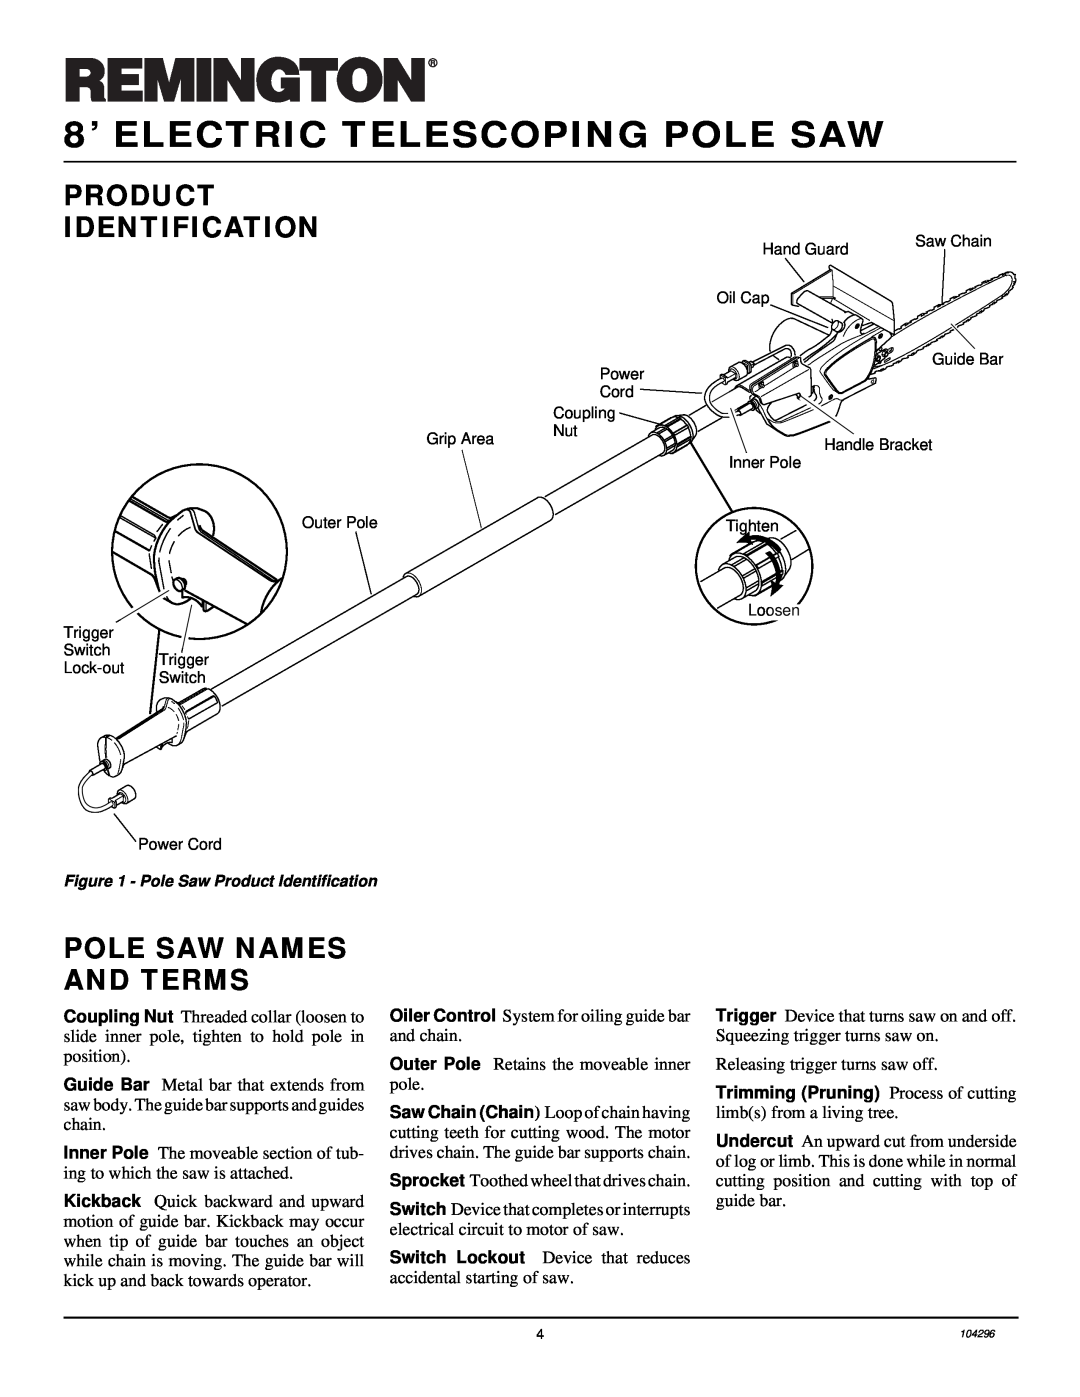 Remington RPS 96 owner manual Product, Identification, Pole Saw Names And Terms, 8’ ELECTRIC TELESCOPING POLE SAW 